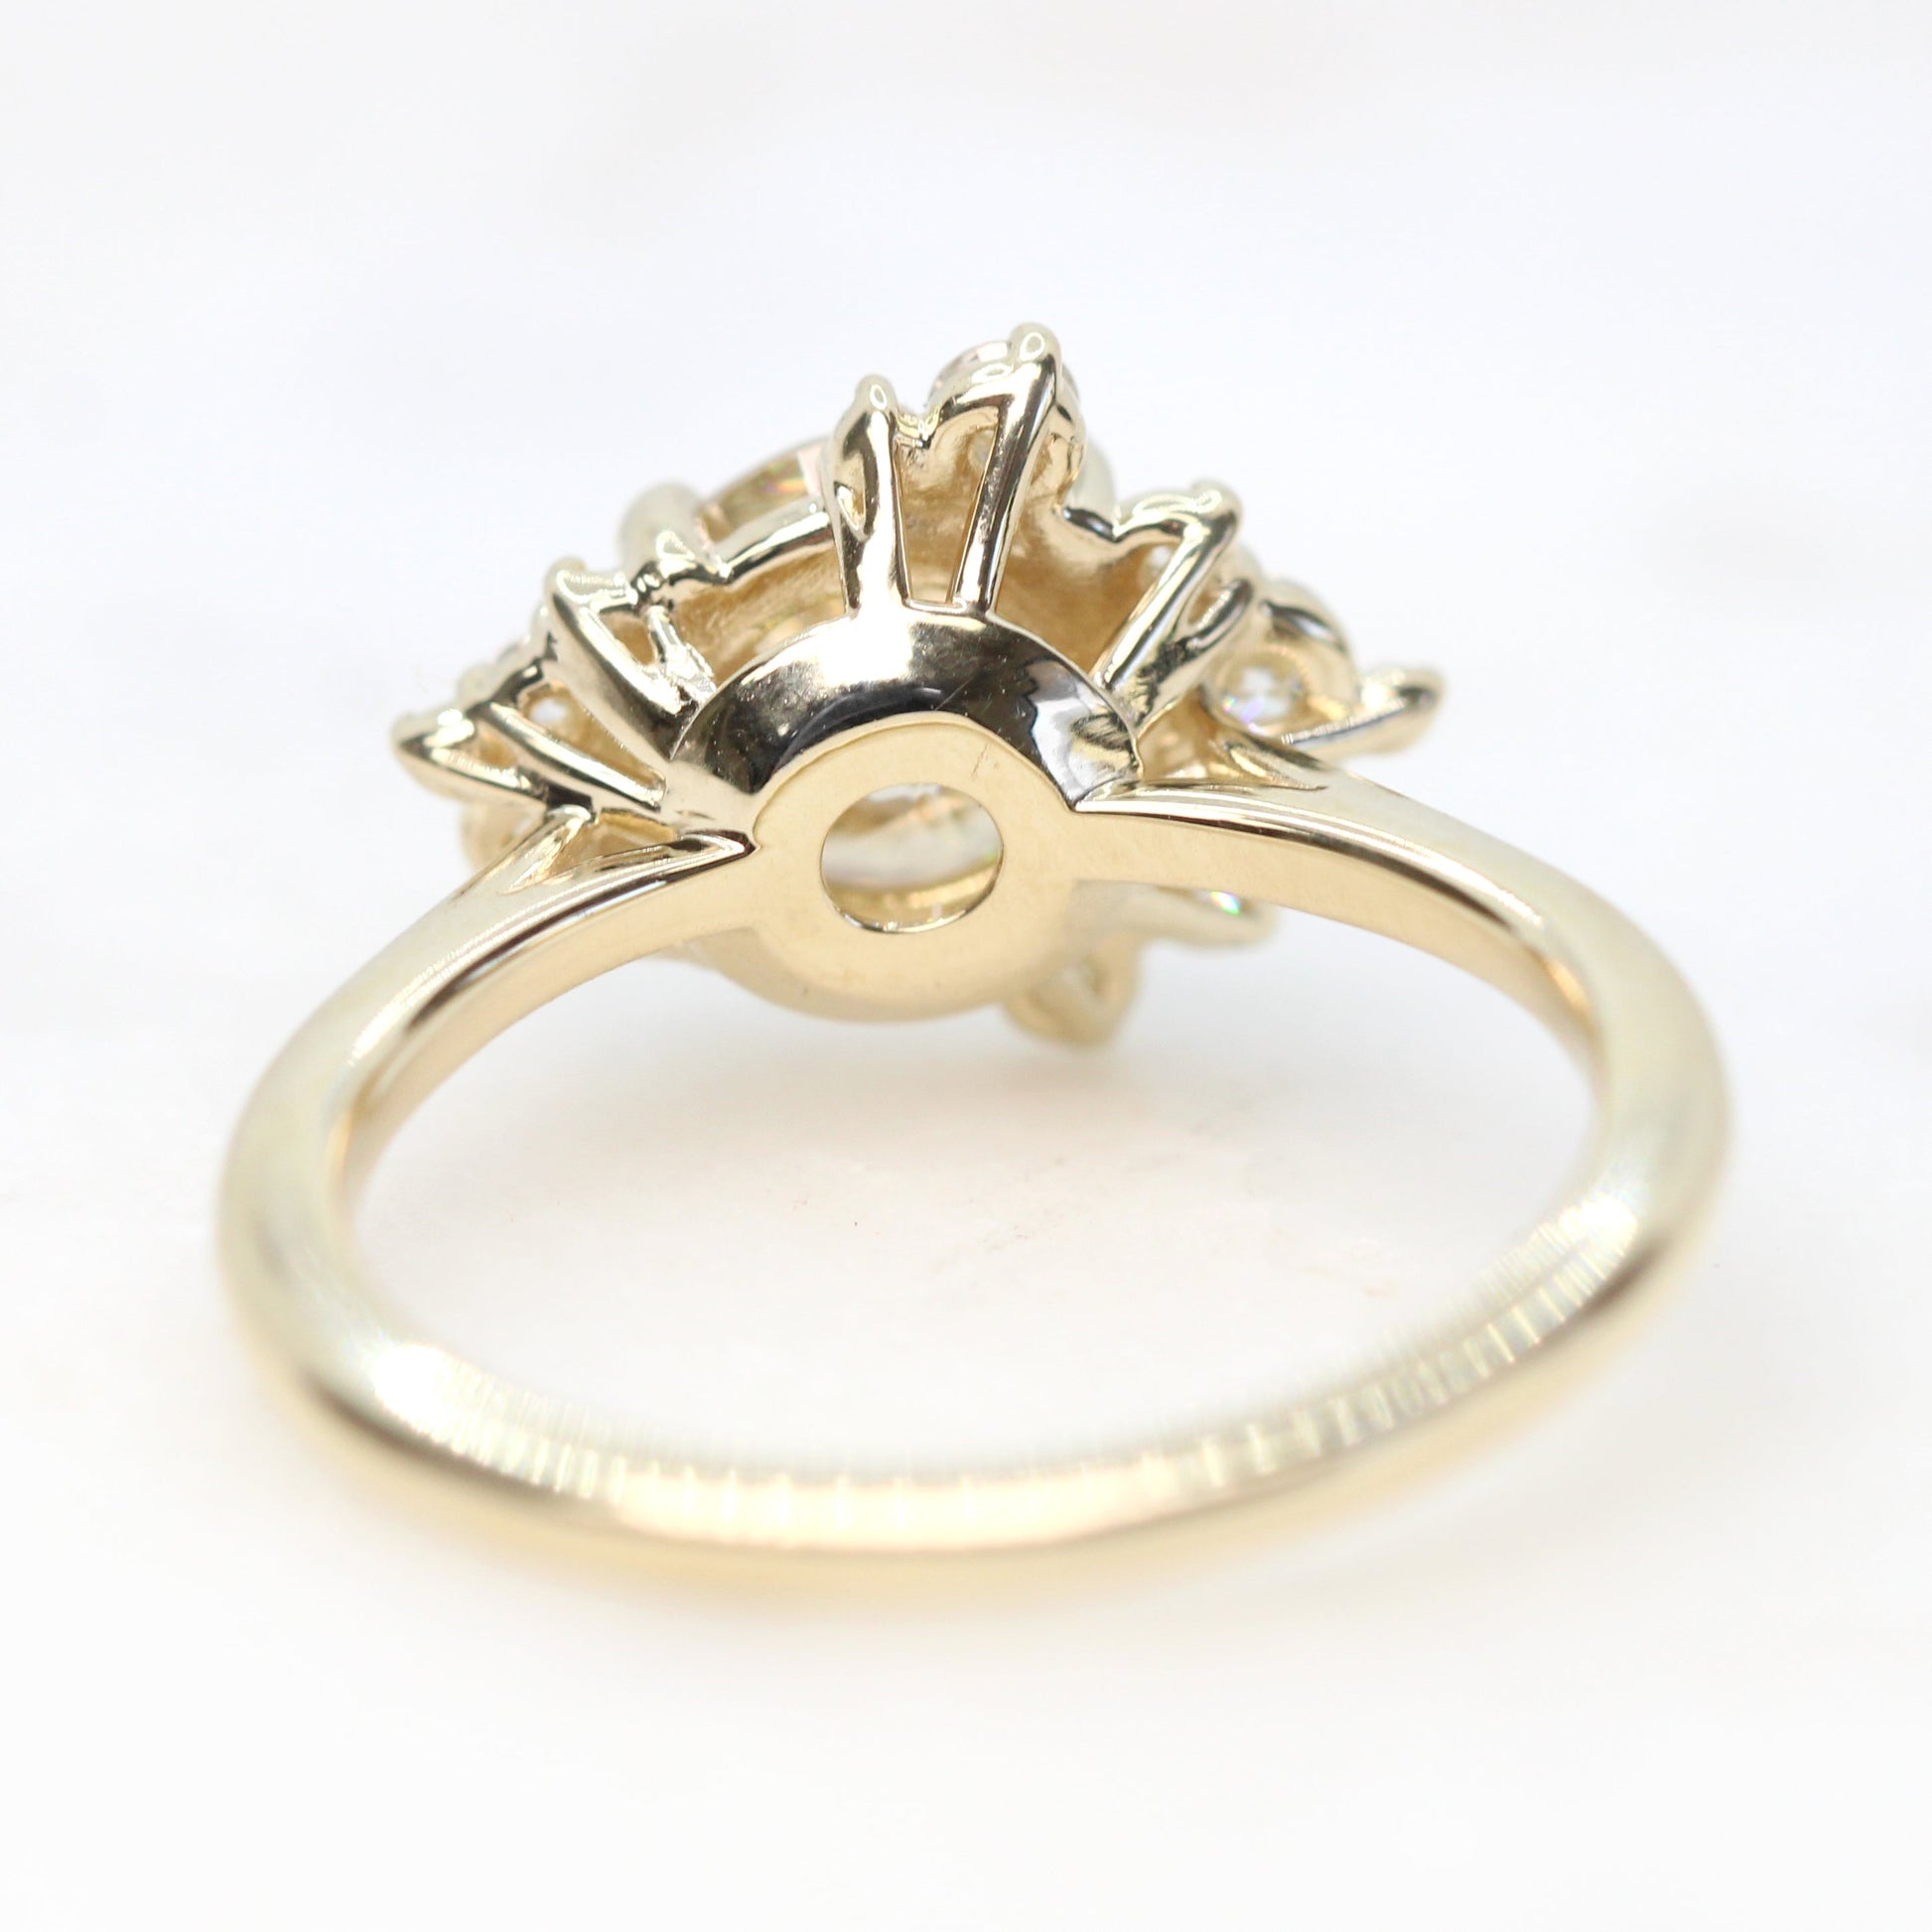 Orion Ring with a 1.25 Carat Round Golden Champagne Moissanite and White Accent Diamonds in 14k Yellow Gold - Ready to Size and Ship - Midwinter Co. Alternative Bridal Rings and Modern Fine Jewelry